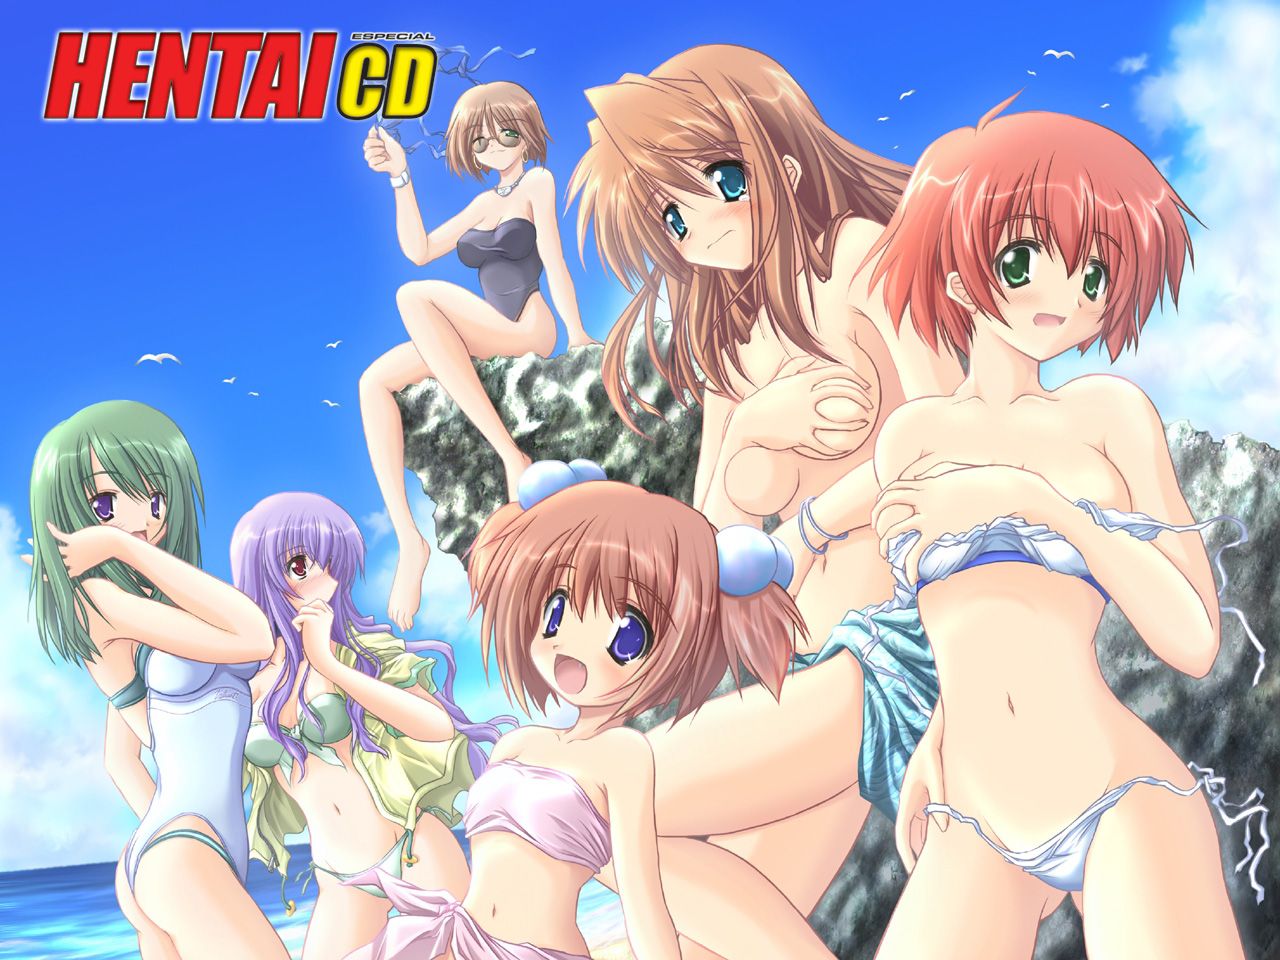 Hentai CD RIP - All wallpapers Update v1 680